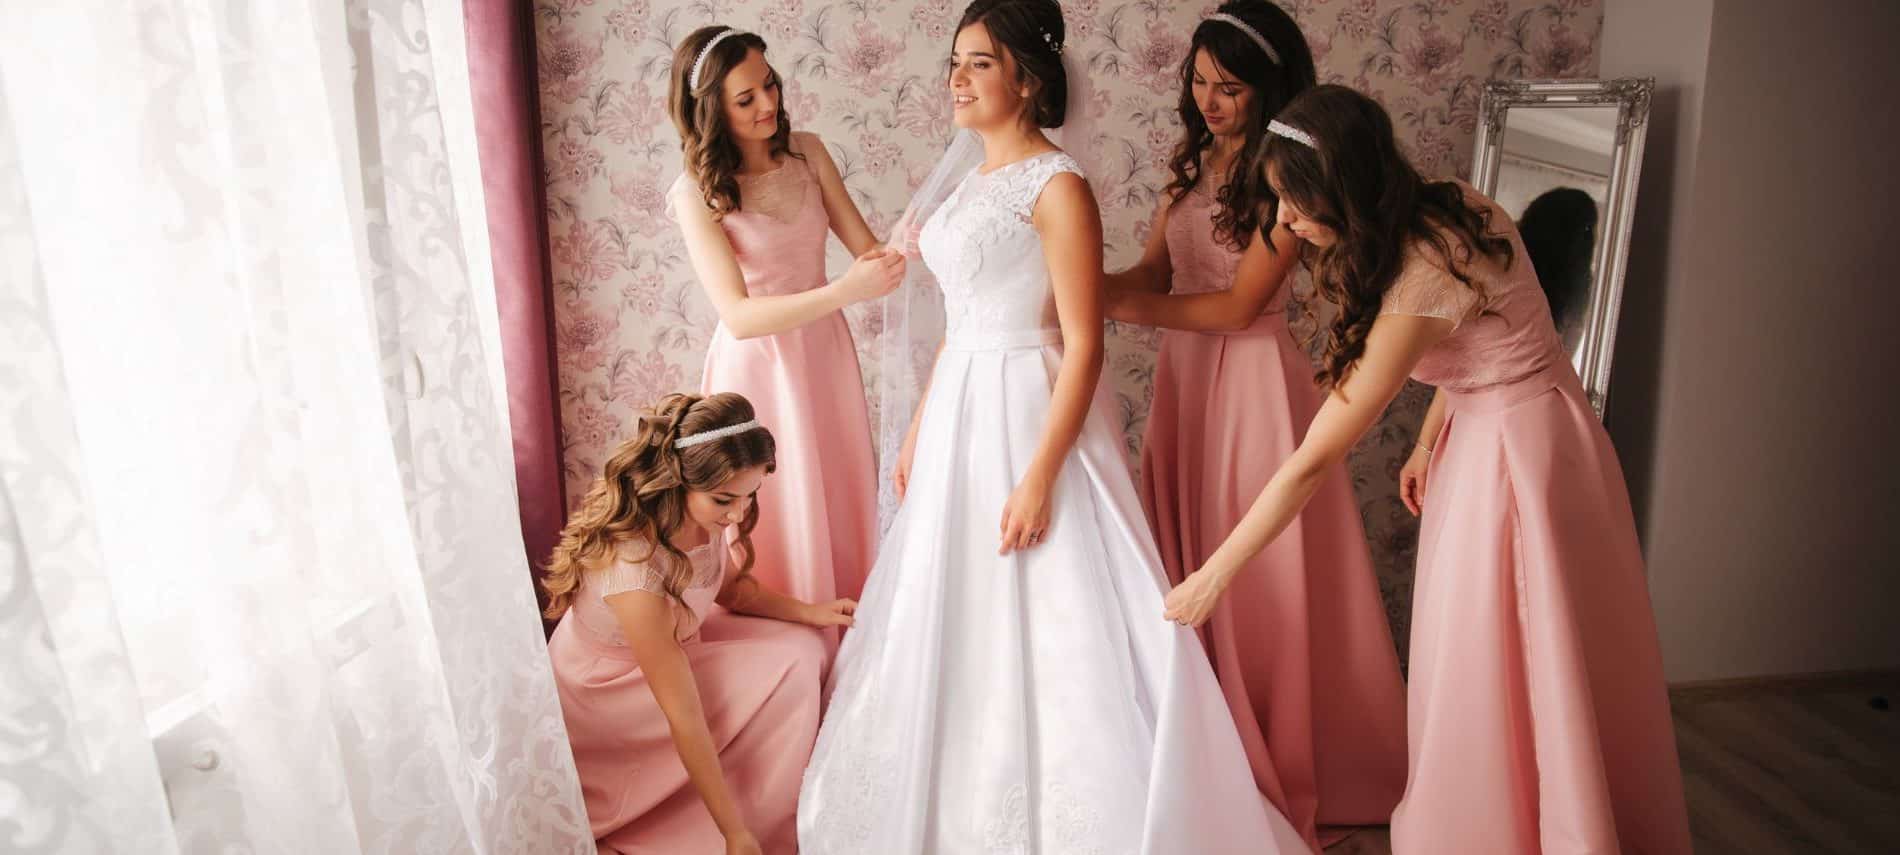 Bridesmaids dressed in pink helping bride finish dressing next to a mirror and open window